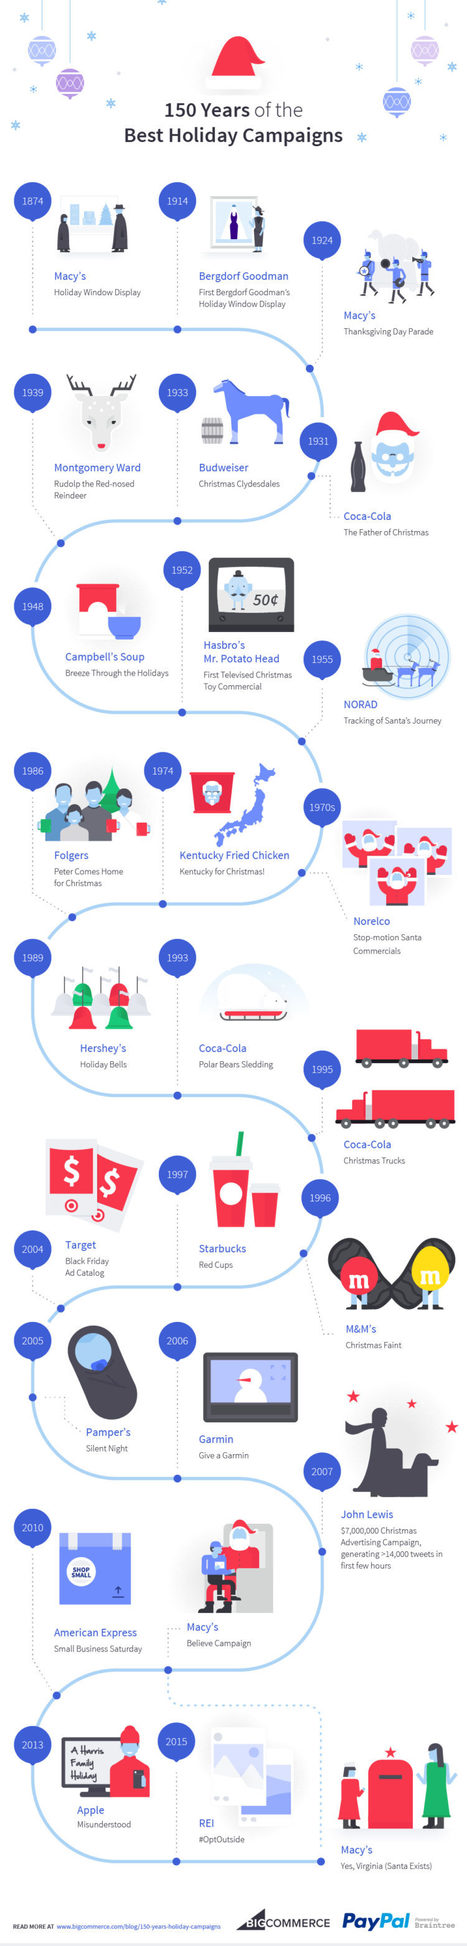 150 Years of the Best Holiday Marketing Campaigns #Infographic | Business Improvement and Social media | Scoop.it